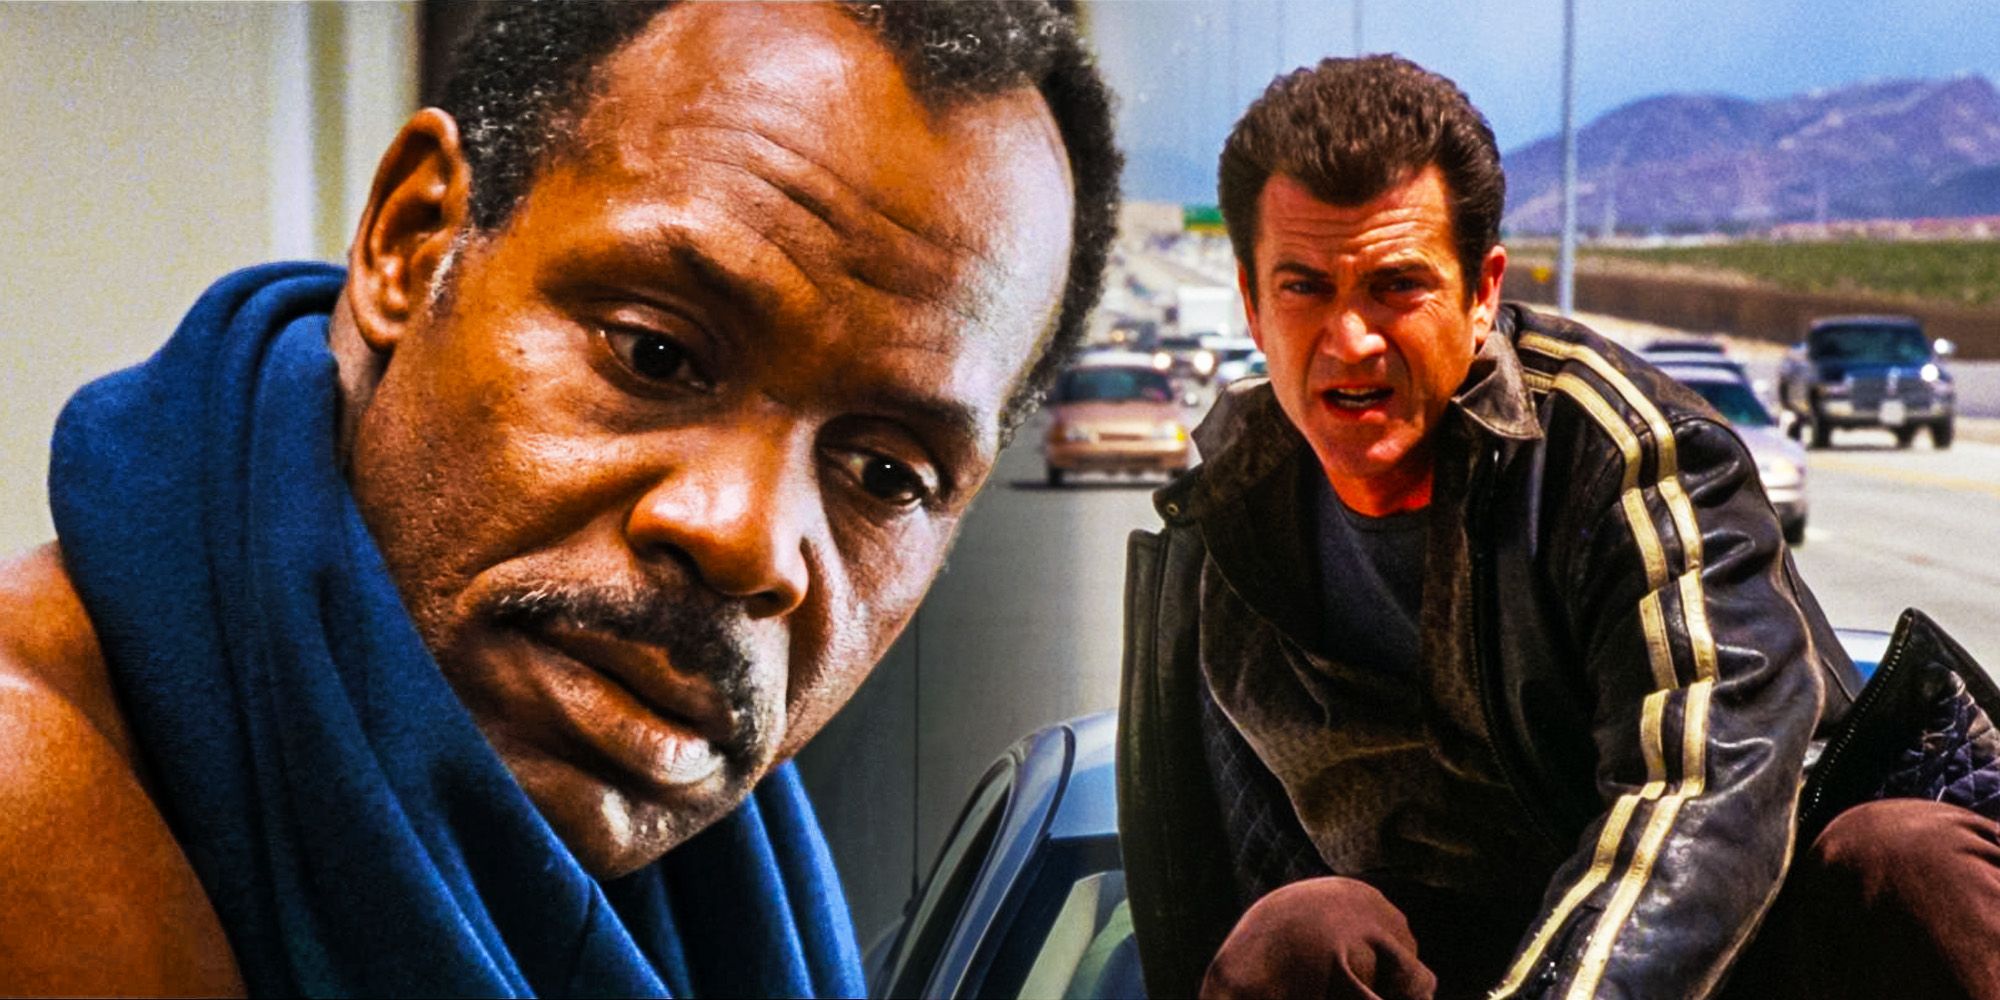 Lethal weapon 4 mel gibson danny glover